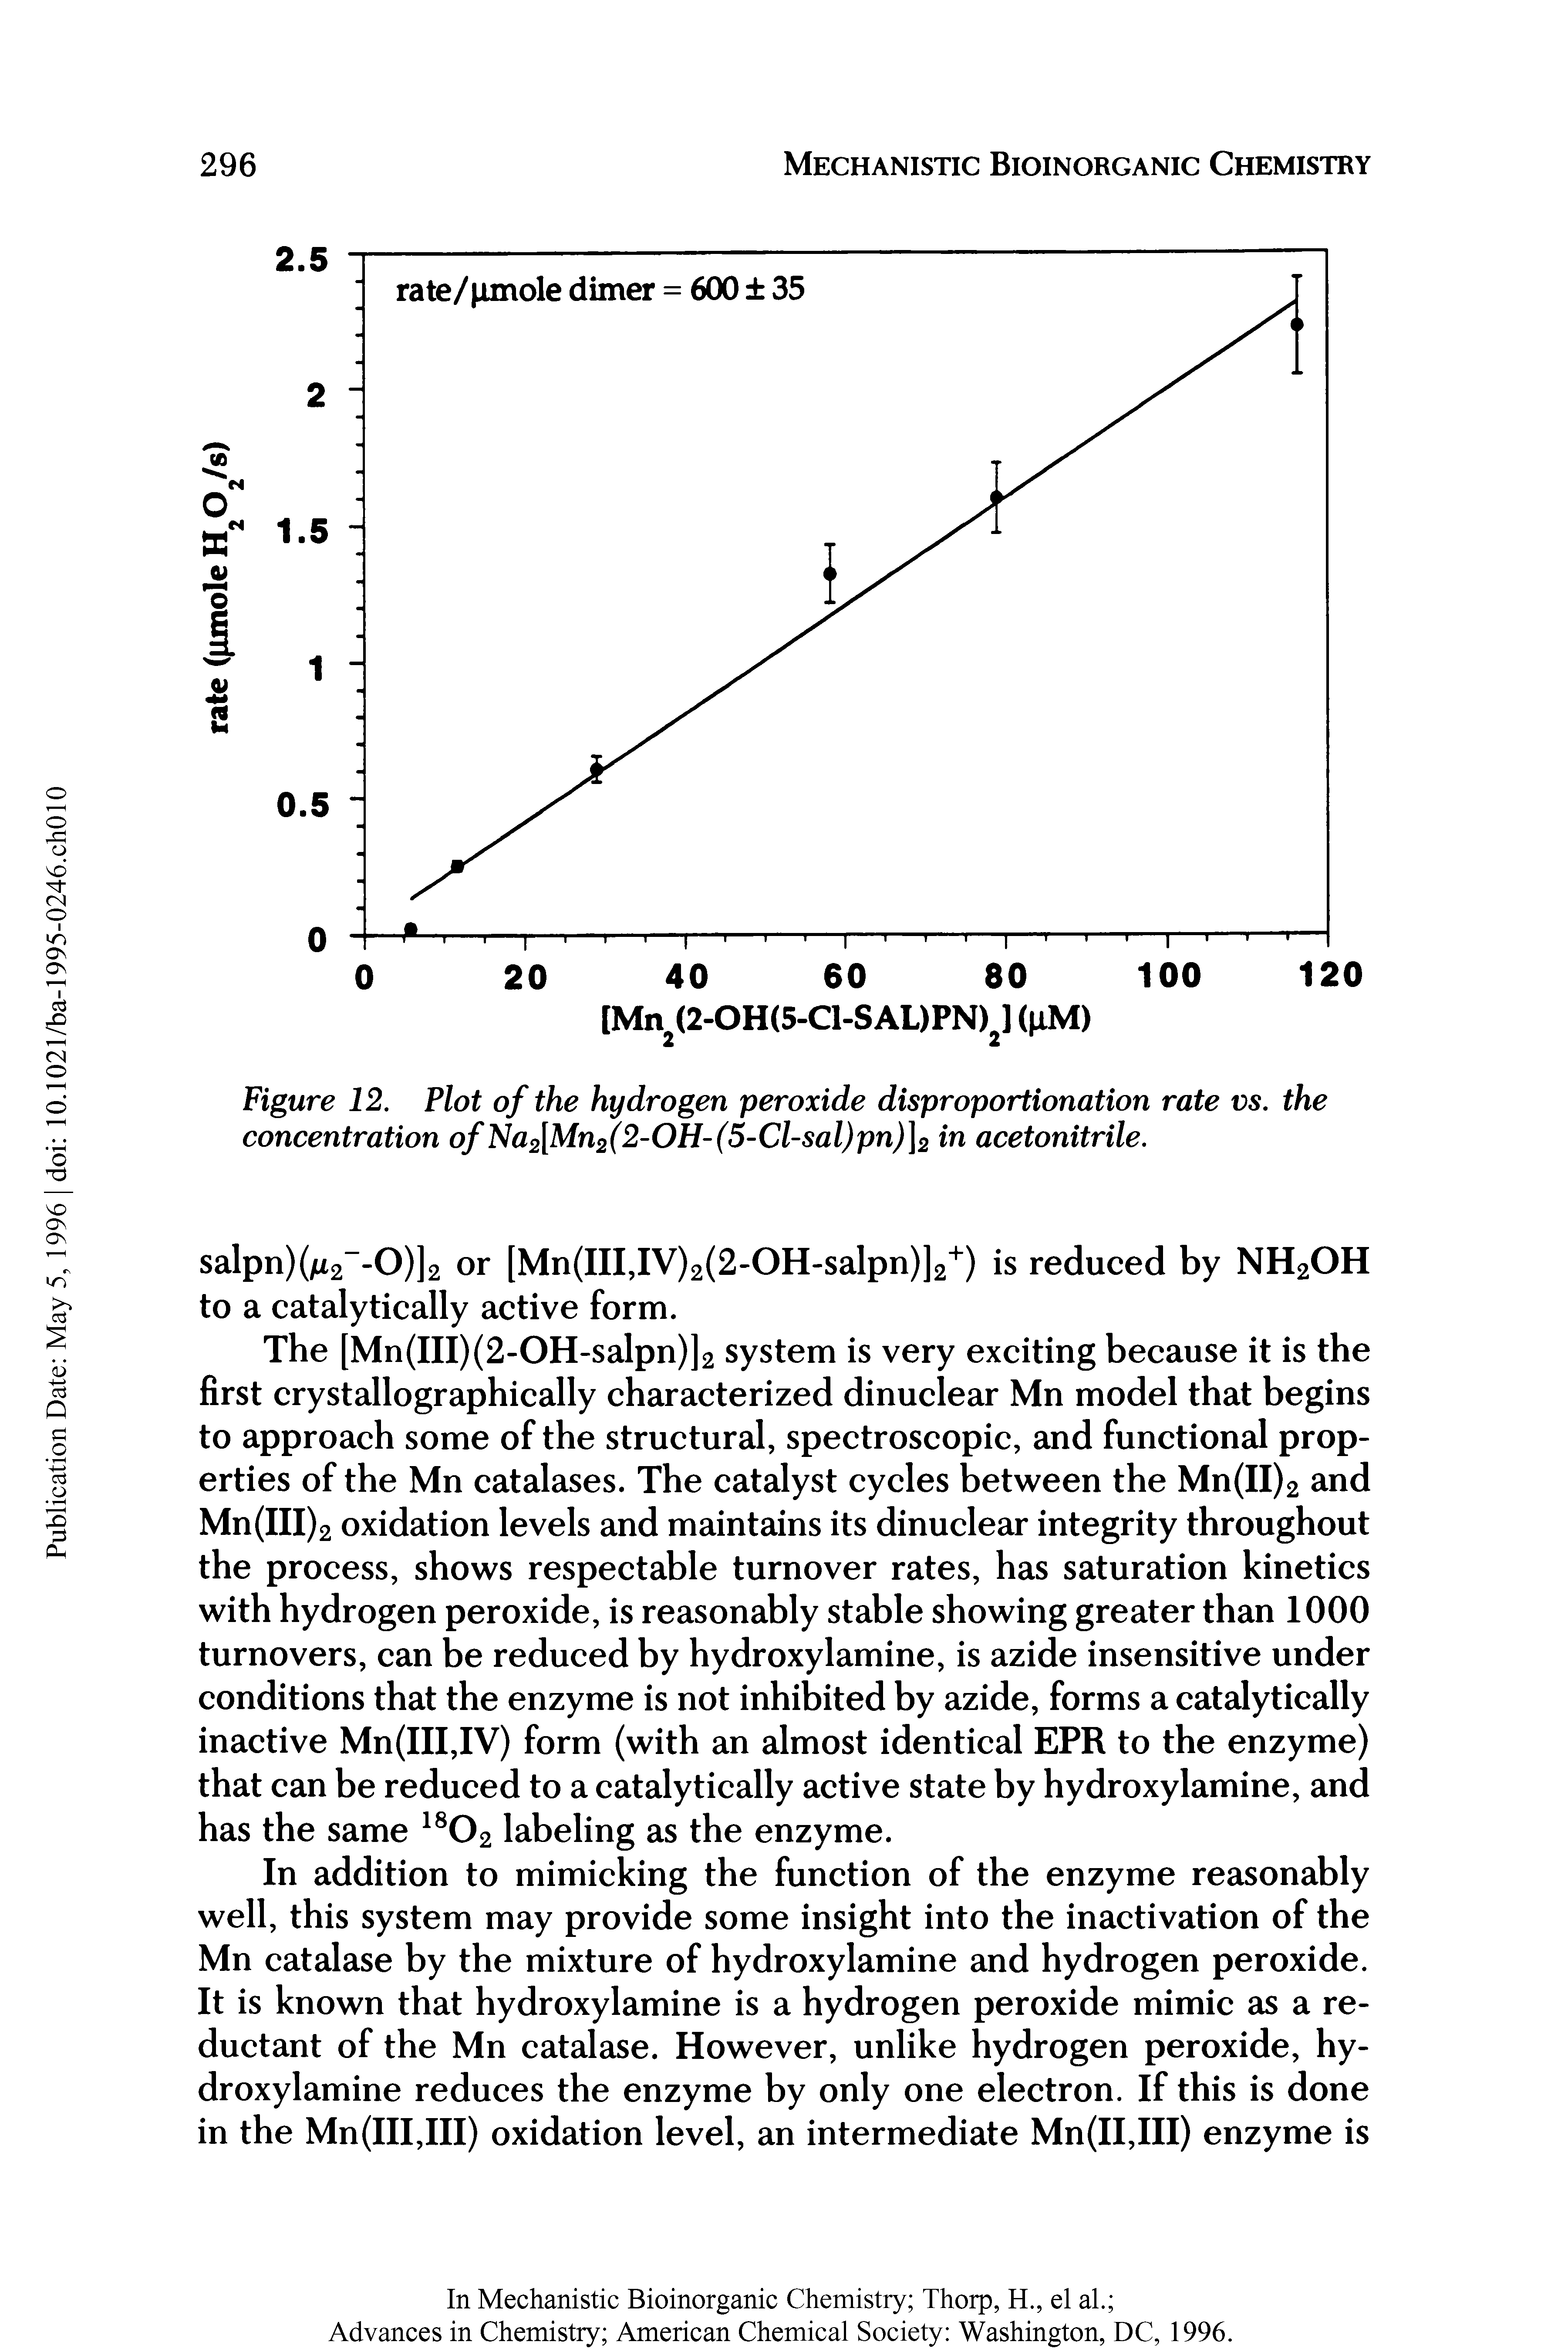 Figure 12. Plot of the hydrogen peroxide disproportionation rate vs. the concentration of Na2[Mn2(2-OH-(5-Cl-sal)pn)]2 in acetonitrile.